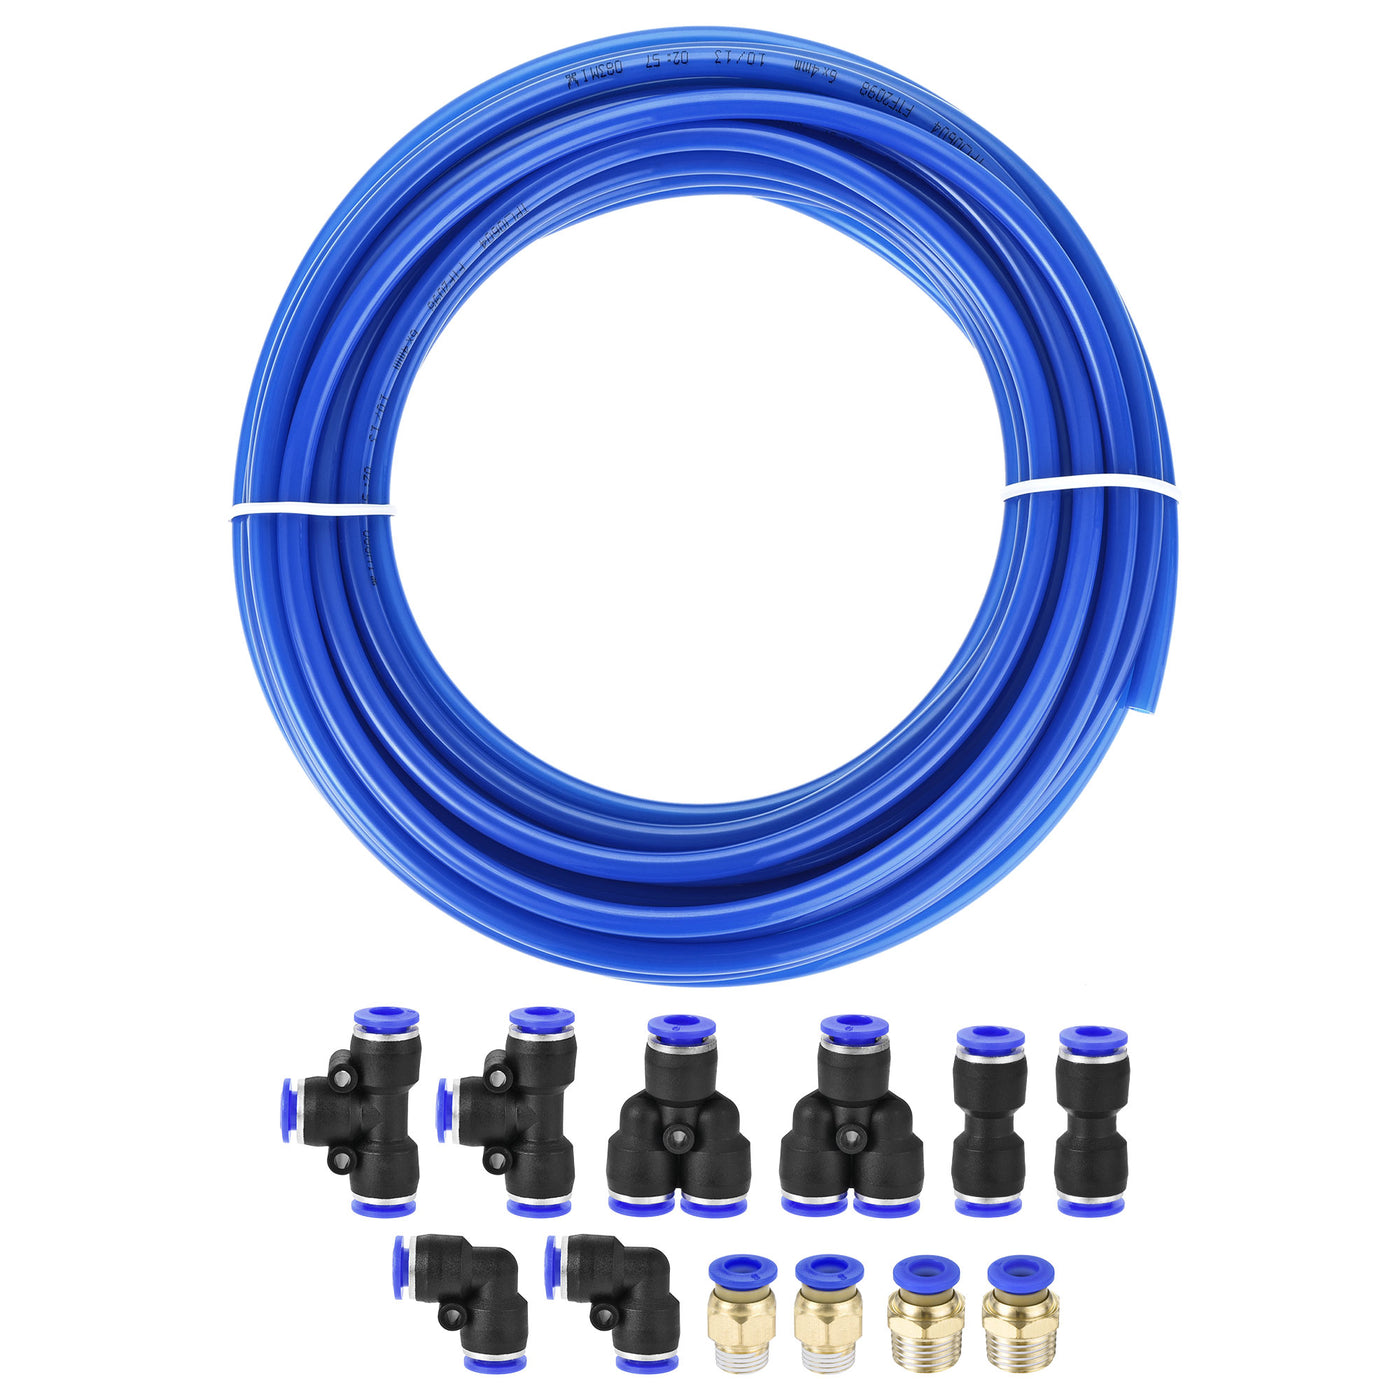 uxcell Uxcell Pneumatic 6mm OD Polyurethane PU Air Hose Tubing Kit 10 Meters Blue with 12 Pcs Push to Connect Fittings